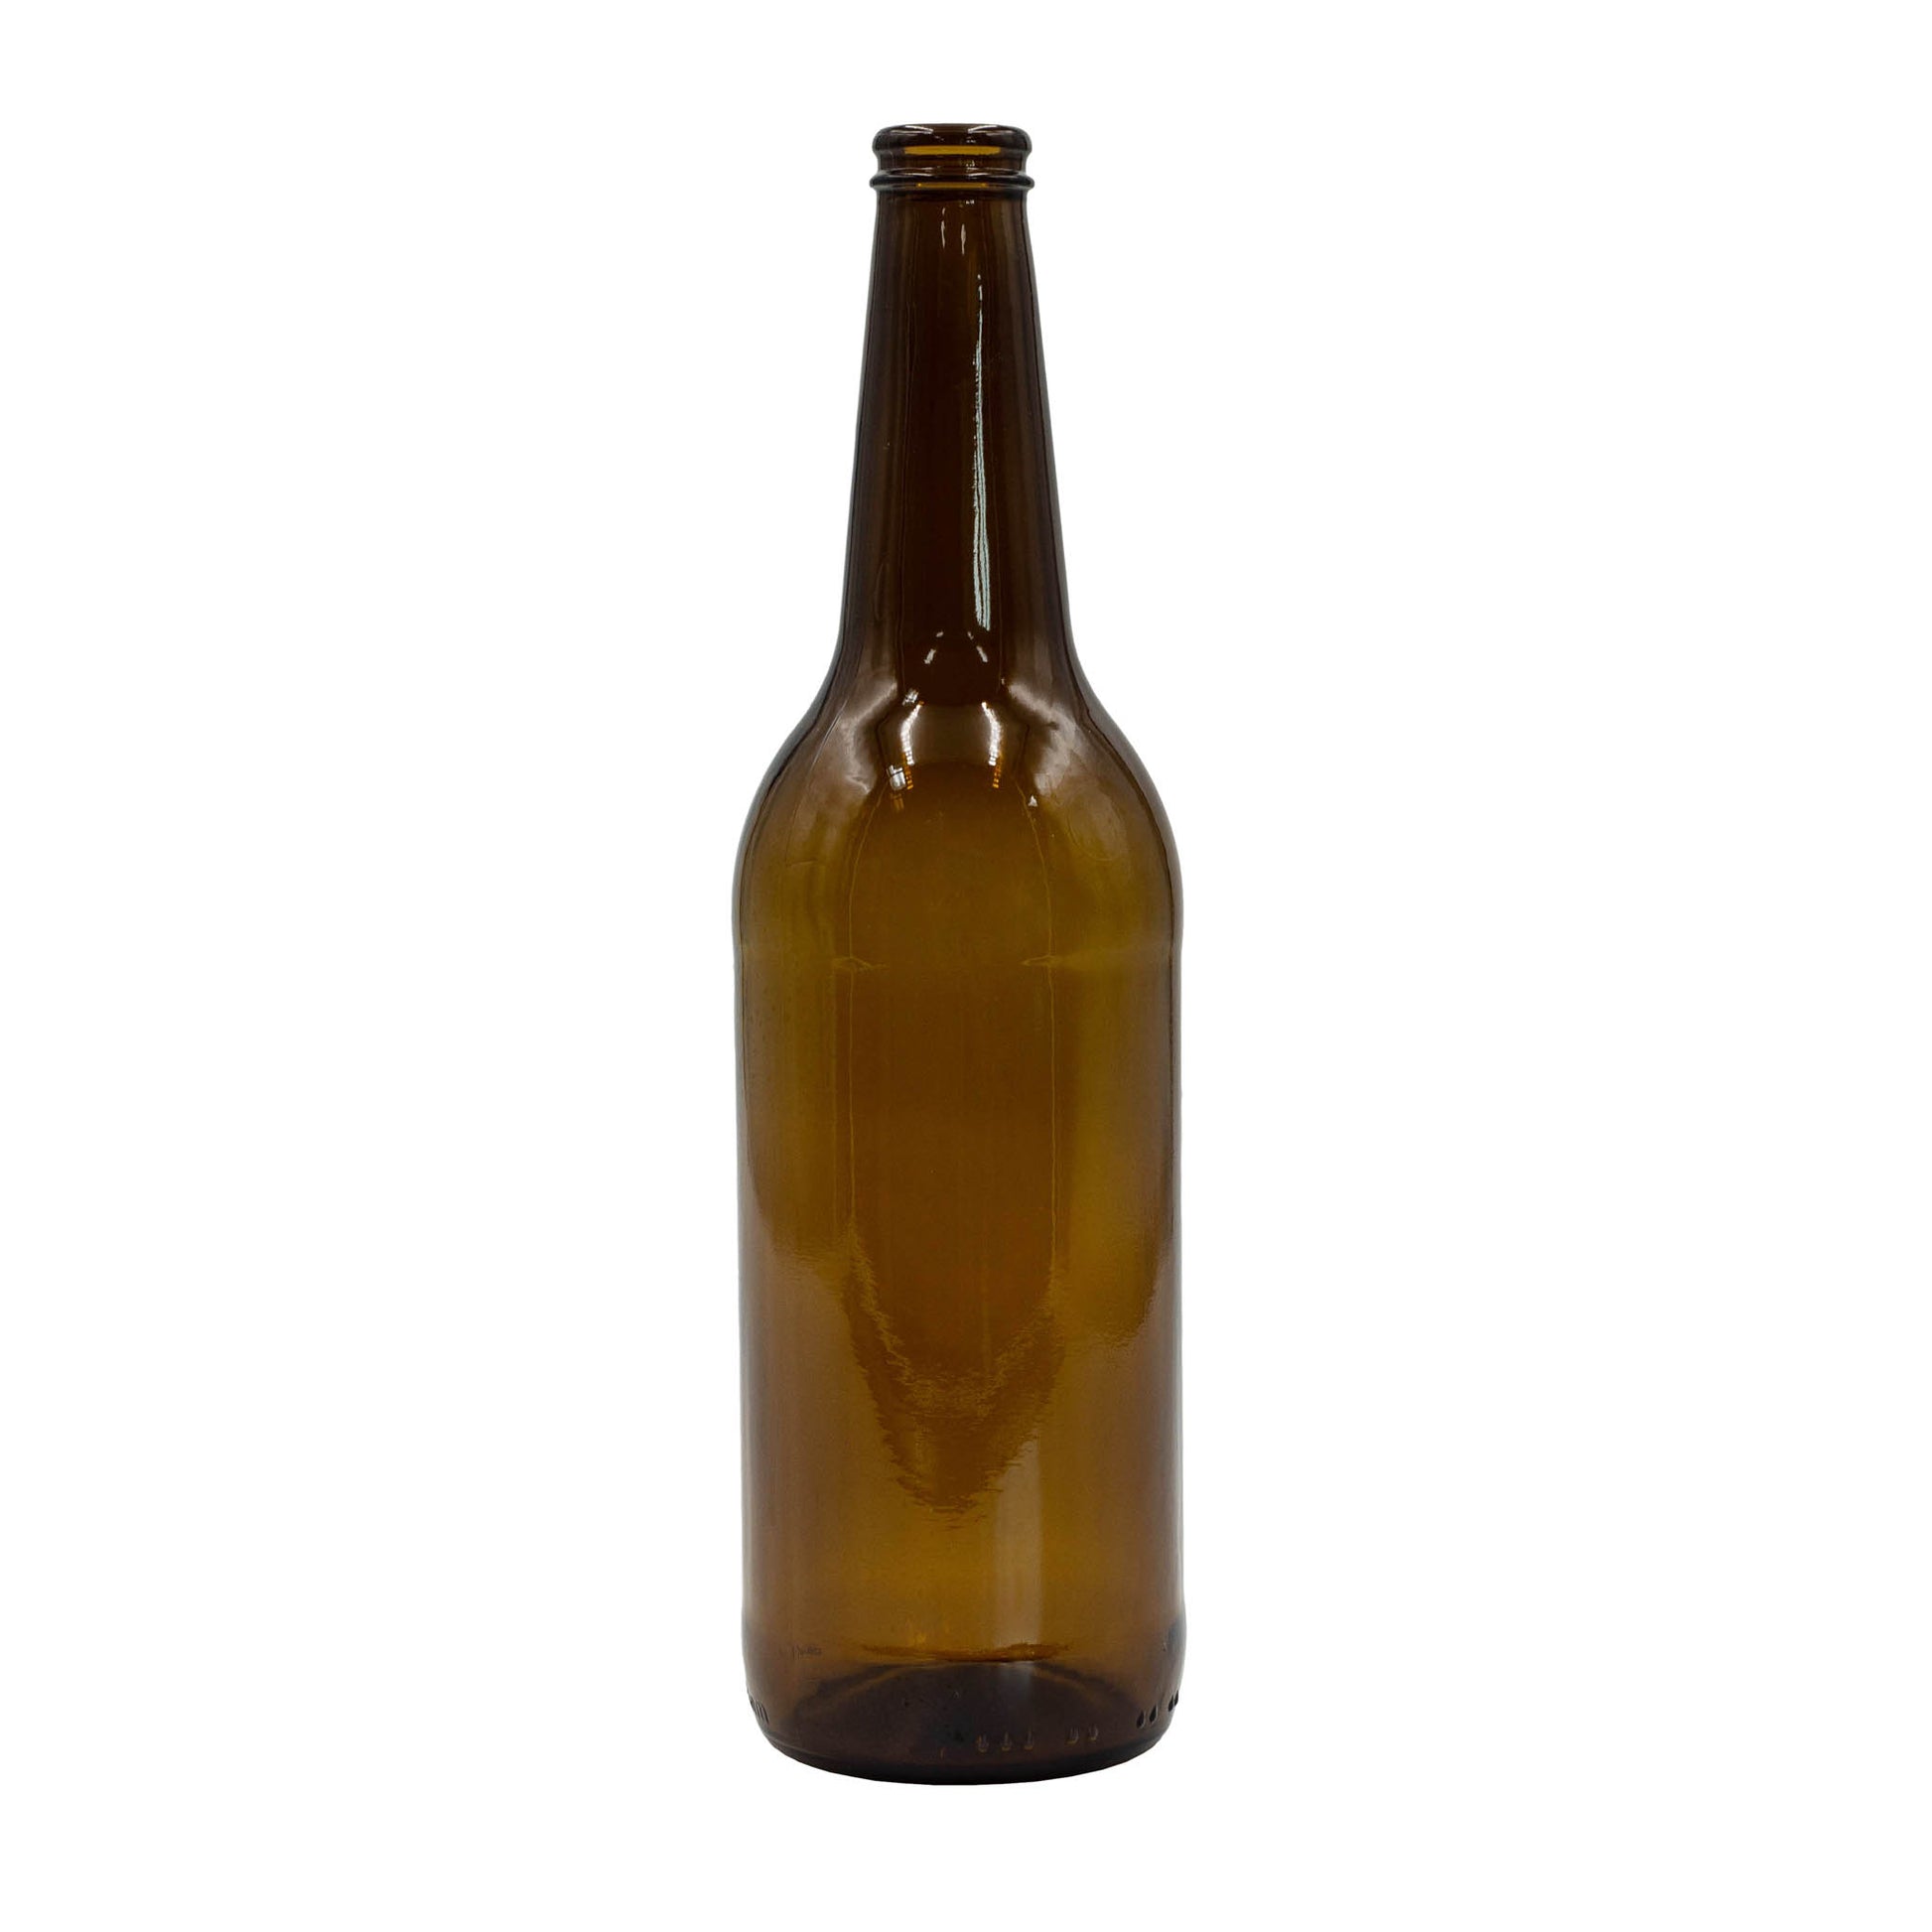 660ml beer bottle made with amber glass and crown cap top